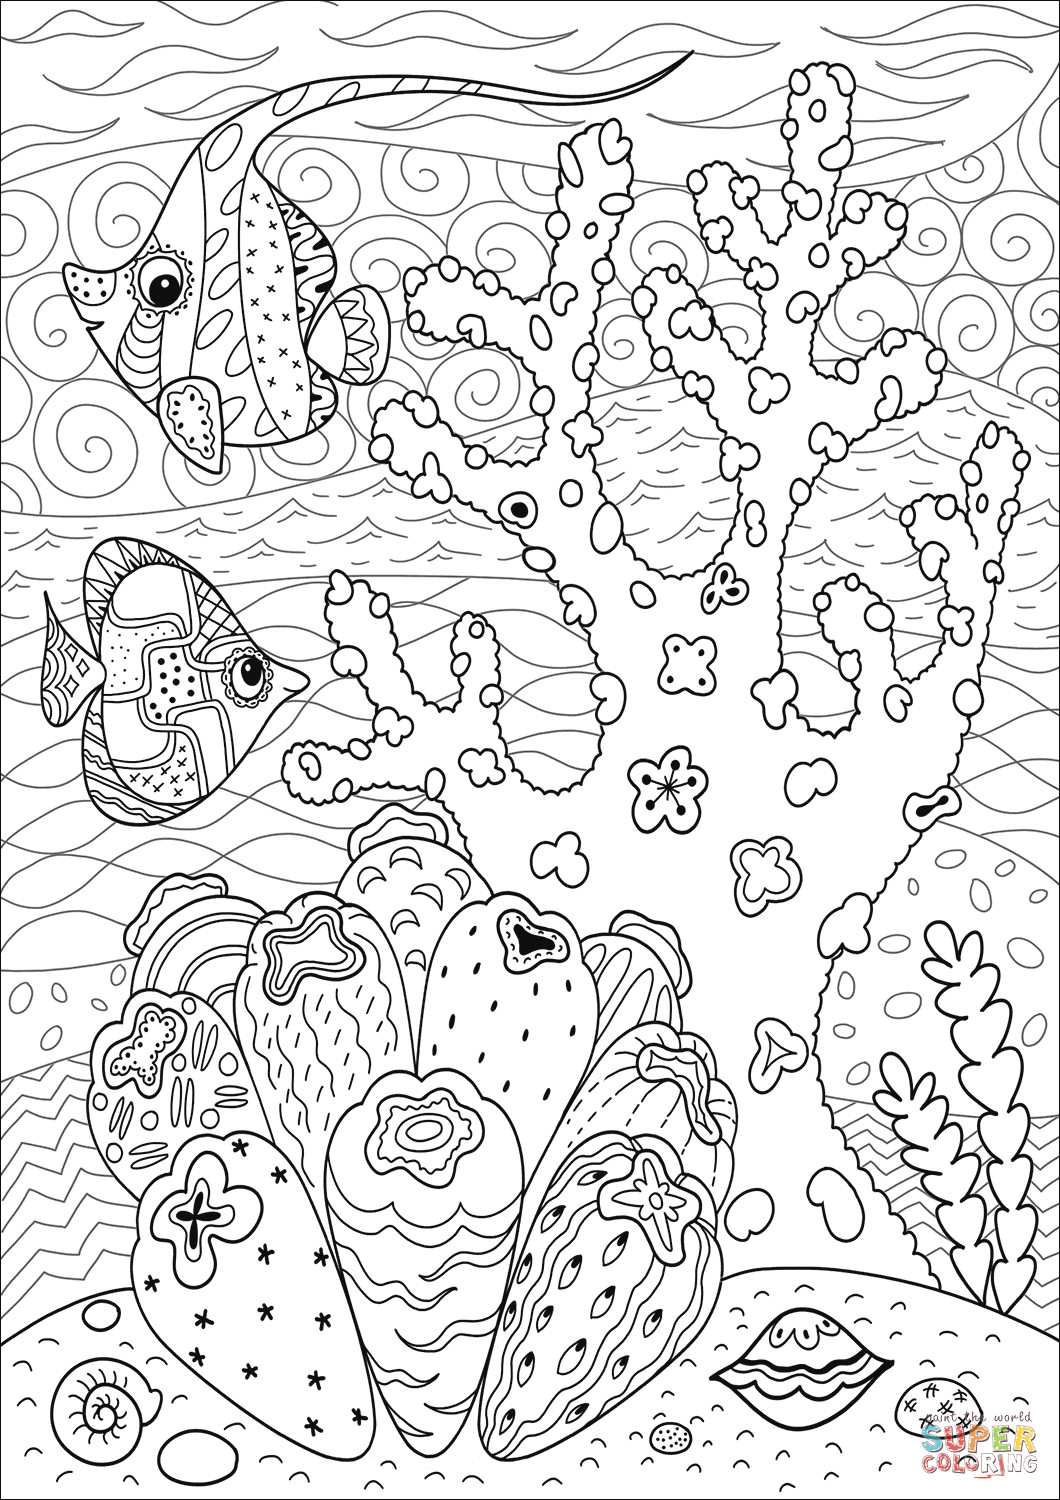 Coral Reef Coloring Pages
 Butterflyfish Enjoying Coral Reef coloring page